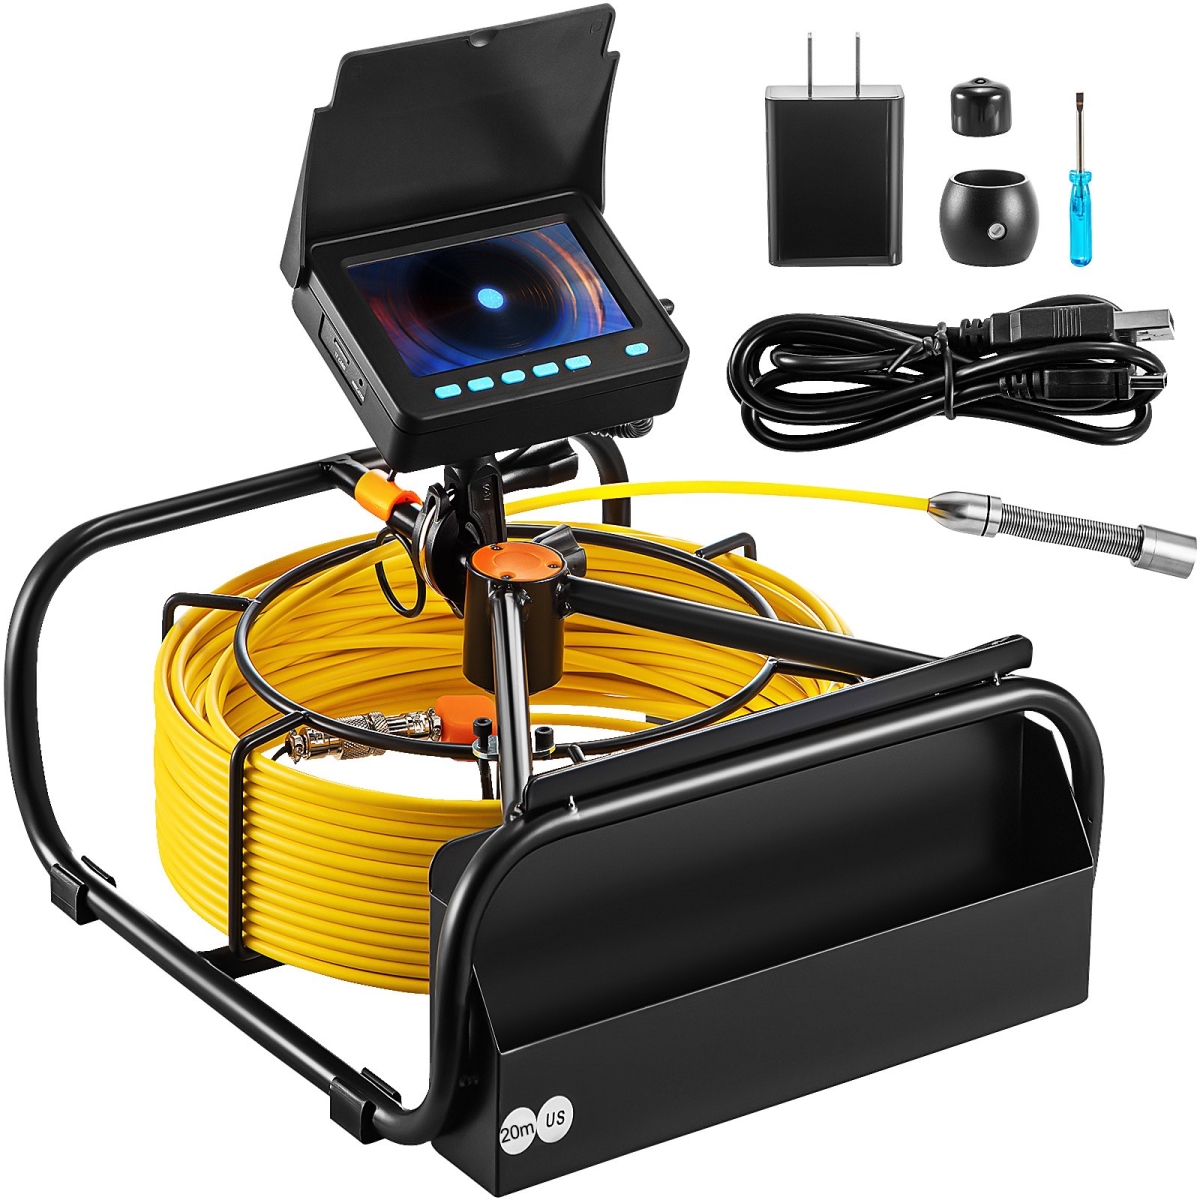 Picture of Vevor GDKSYCM-4.3203XT5V0 Sewer Camera&#44; 65.6 ft. 4.3 in. Screen&#44; Pipeline Inspection Camera with DVR Function & Snake Cable